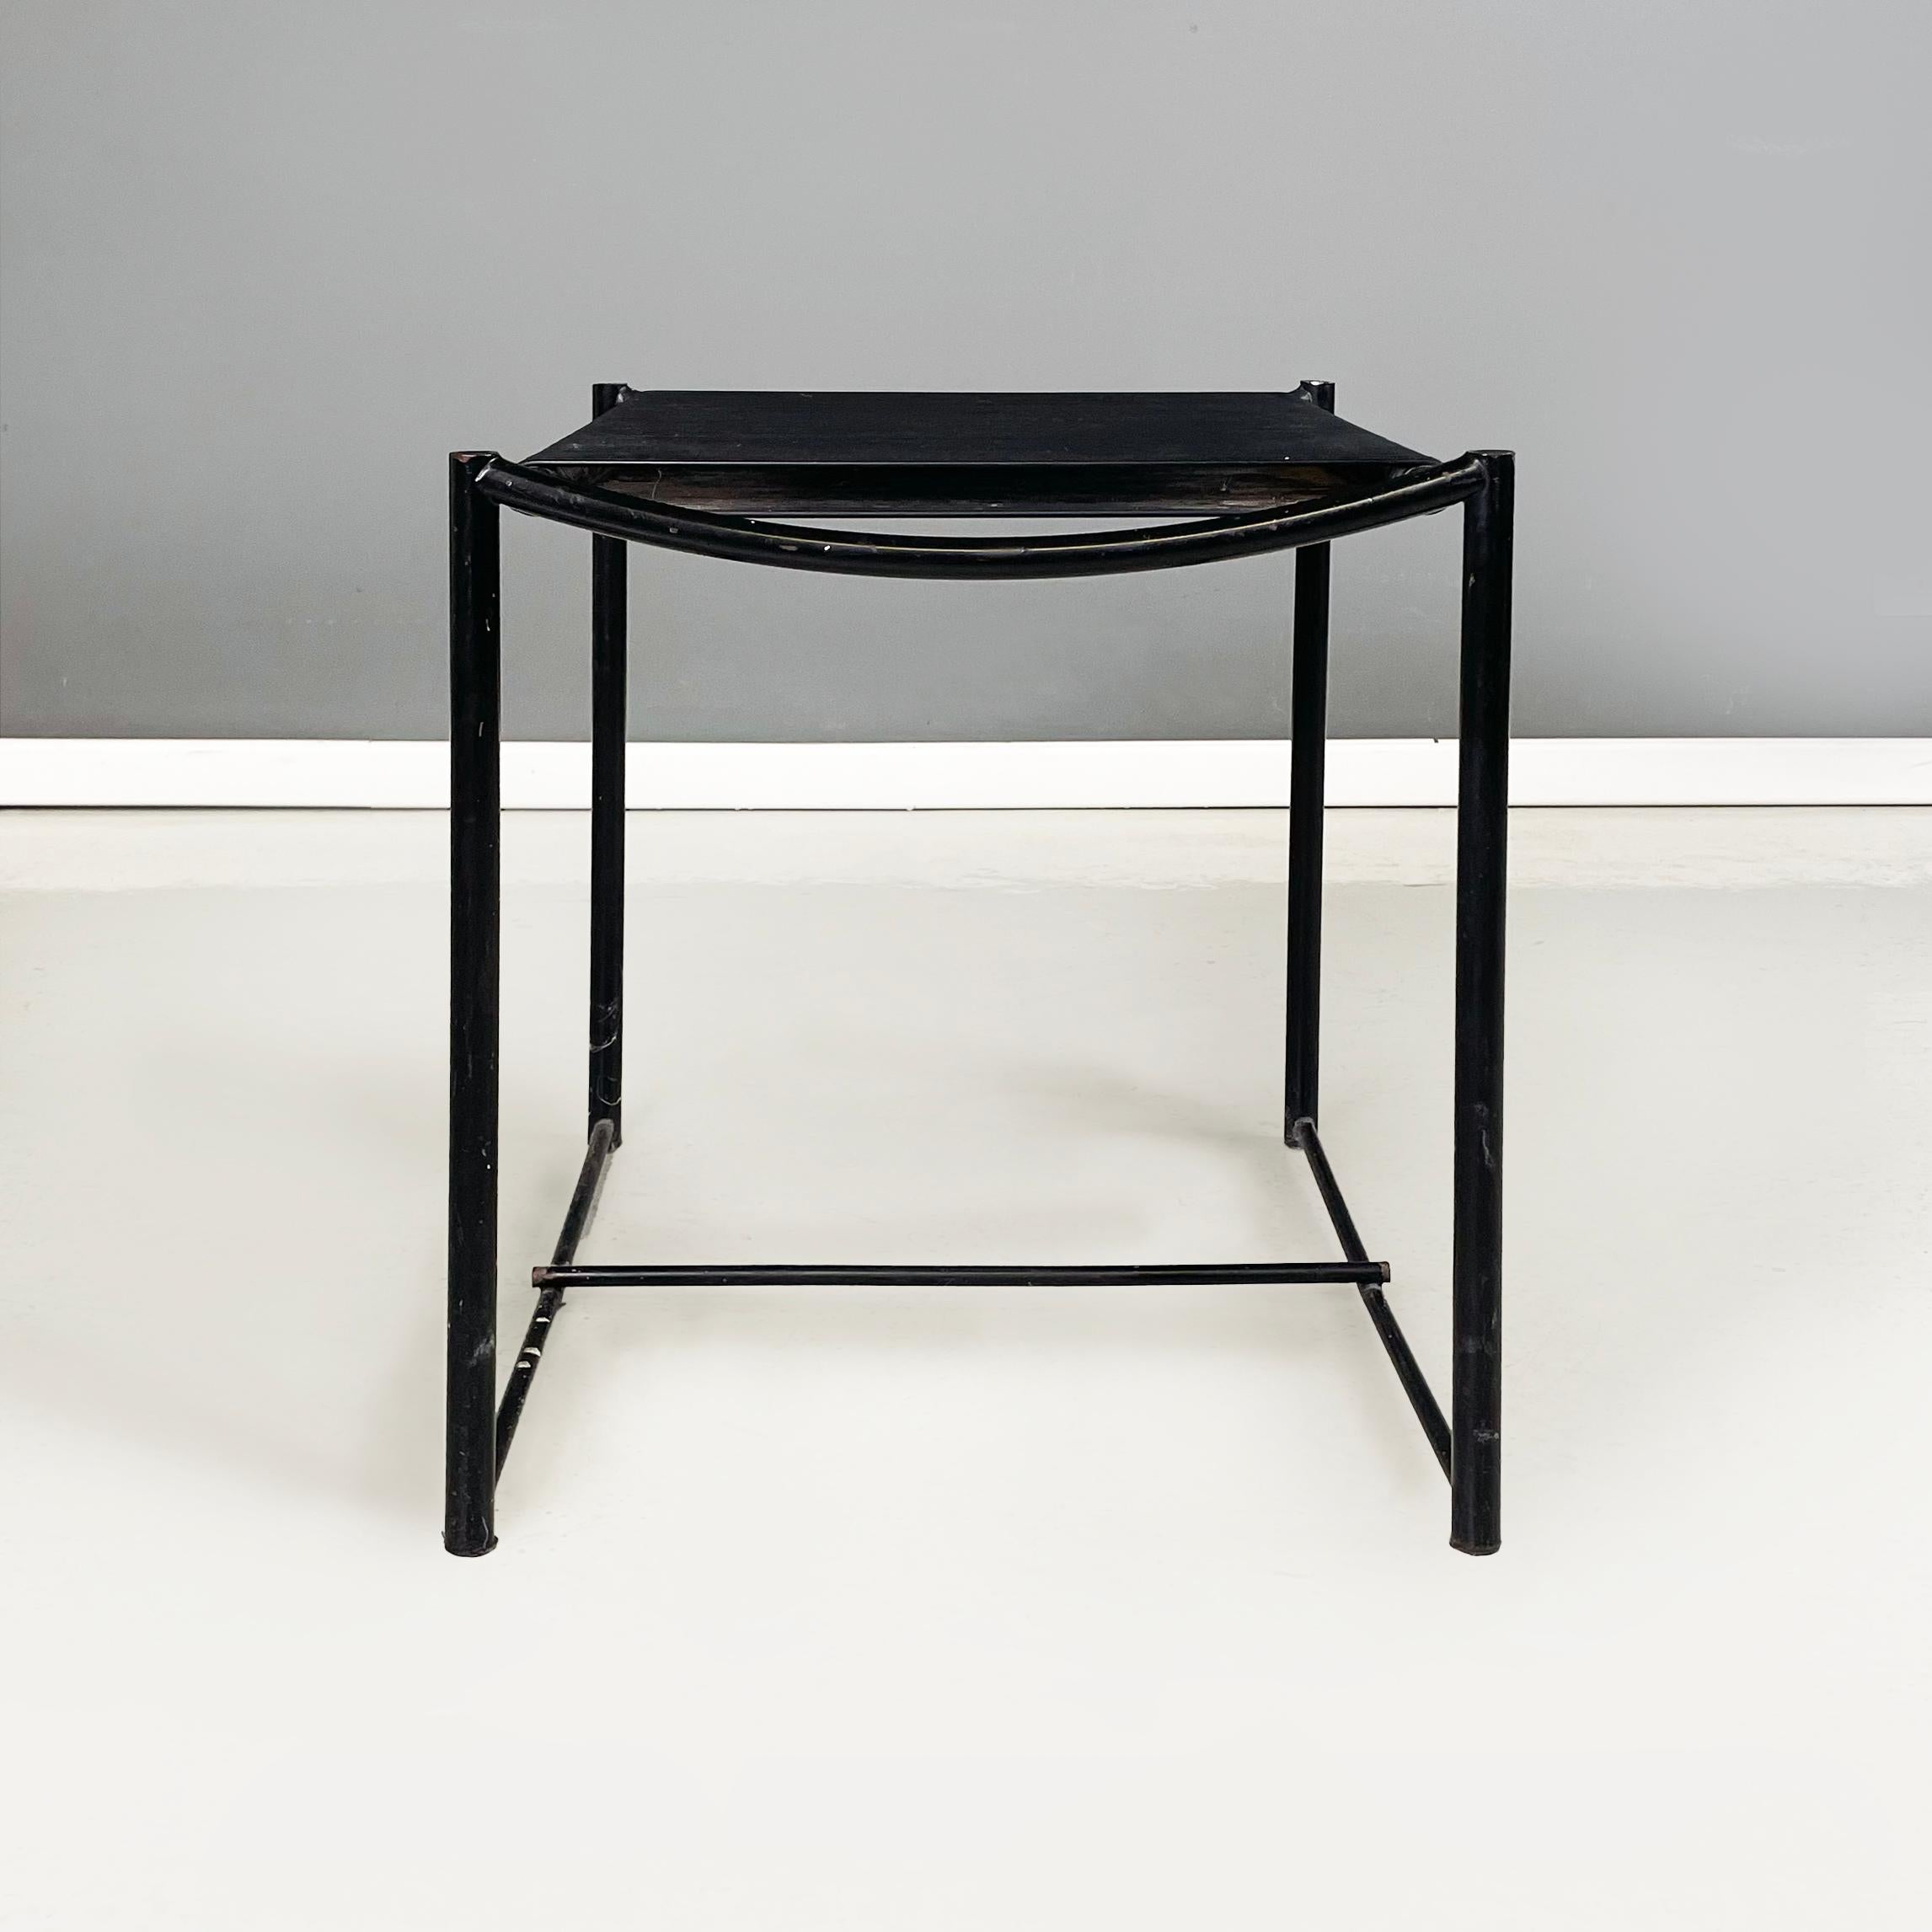 Italian modern black Stool Spaghetti by Giandomenico Belotti for Alias, 1980s
tool mod. Spaghetti  with rectangular and elastic seat and back made from black scooby threads. The structure is in black painted metal rod with curved handle behind the